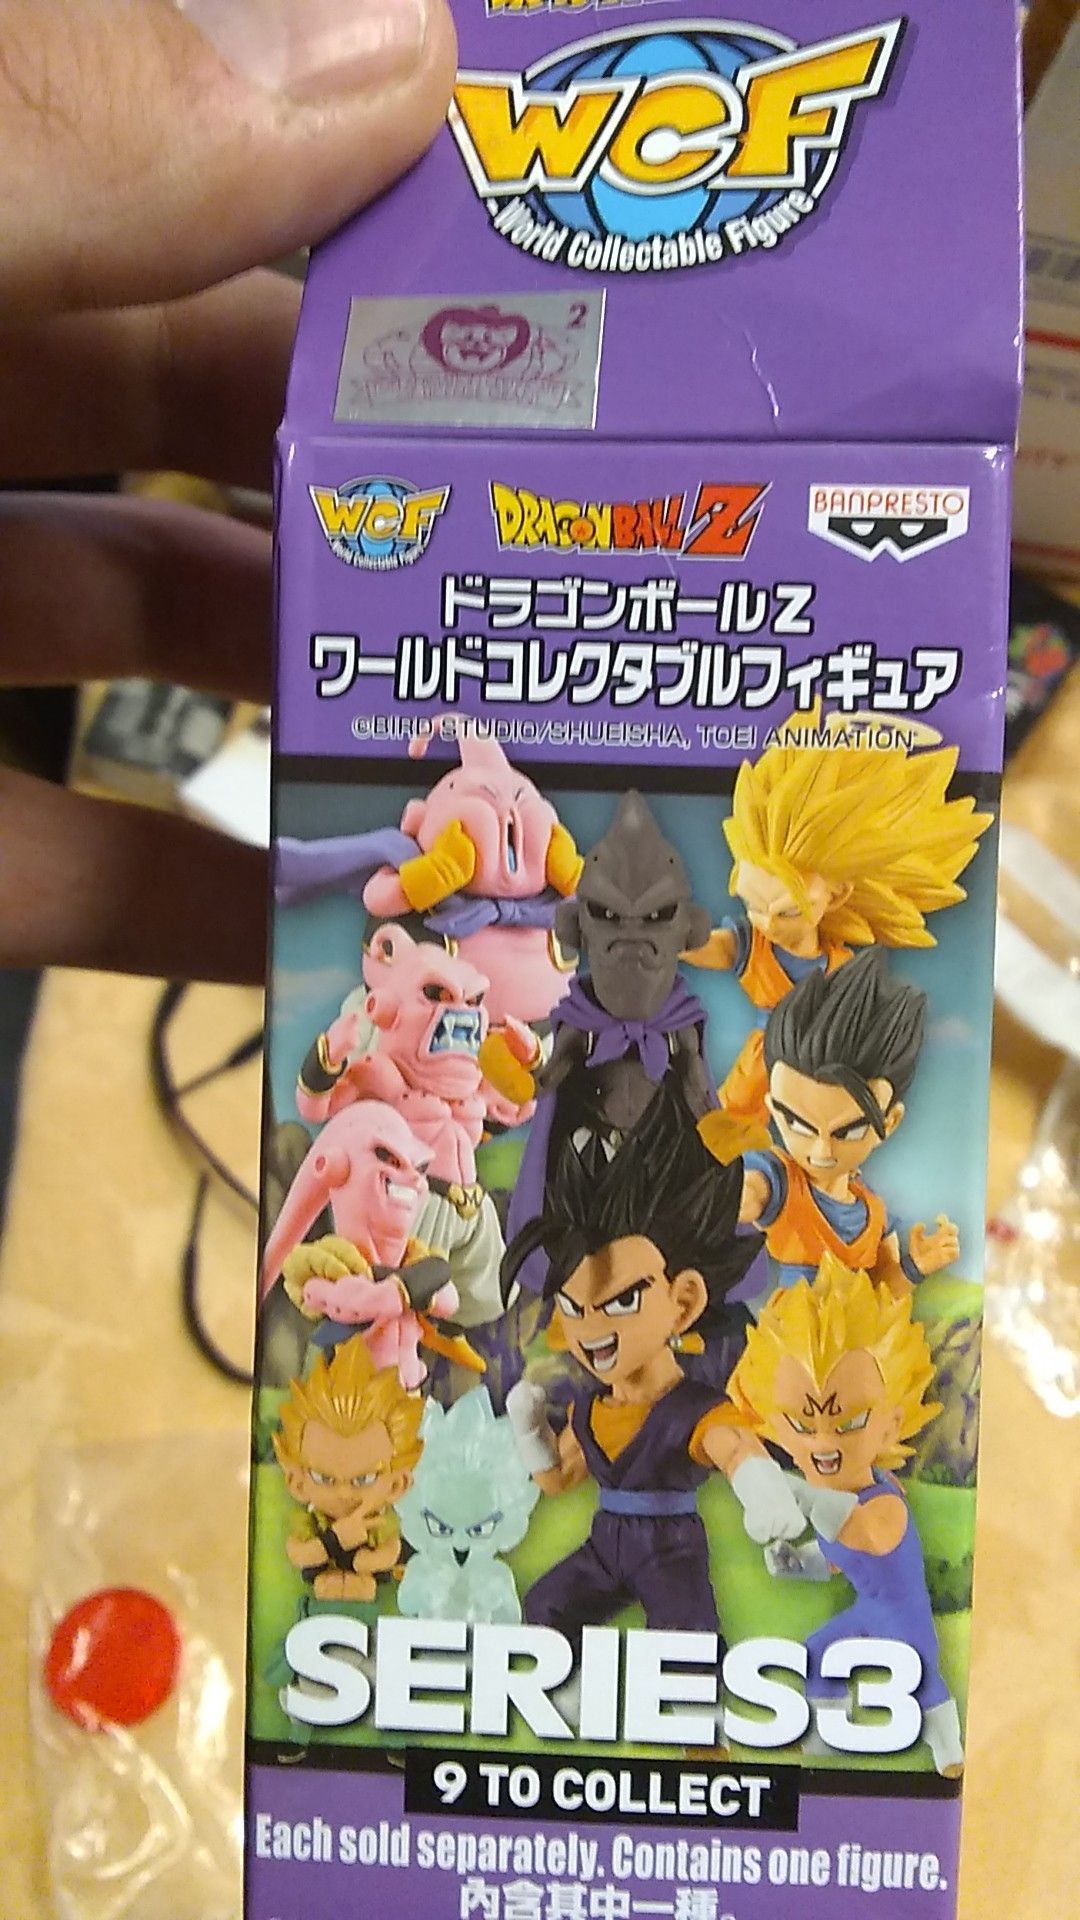 Dragon Ball z Japanese version box isn't the best. But not much of these around for a good price